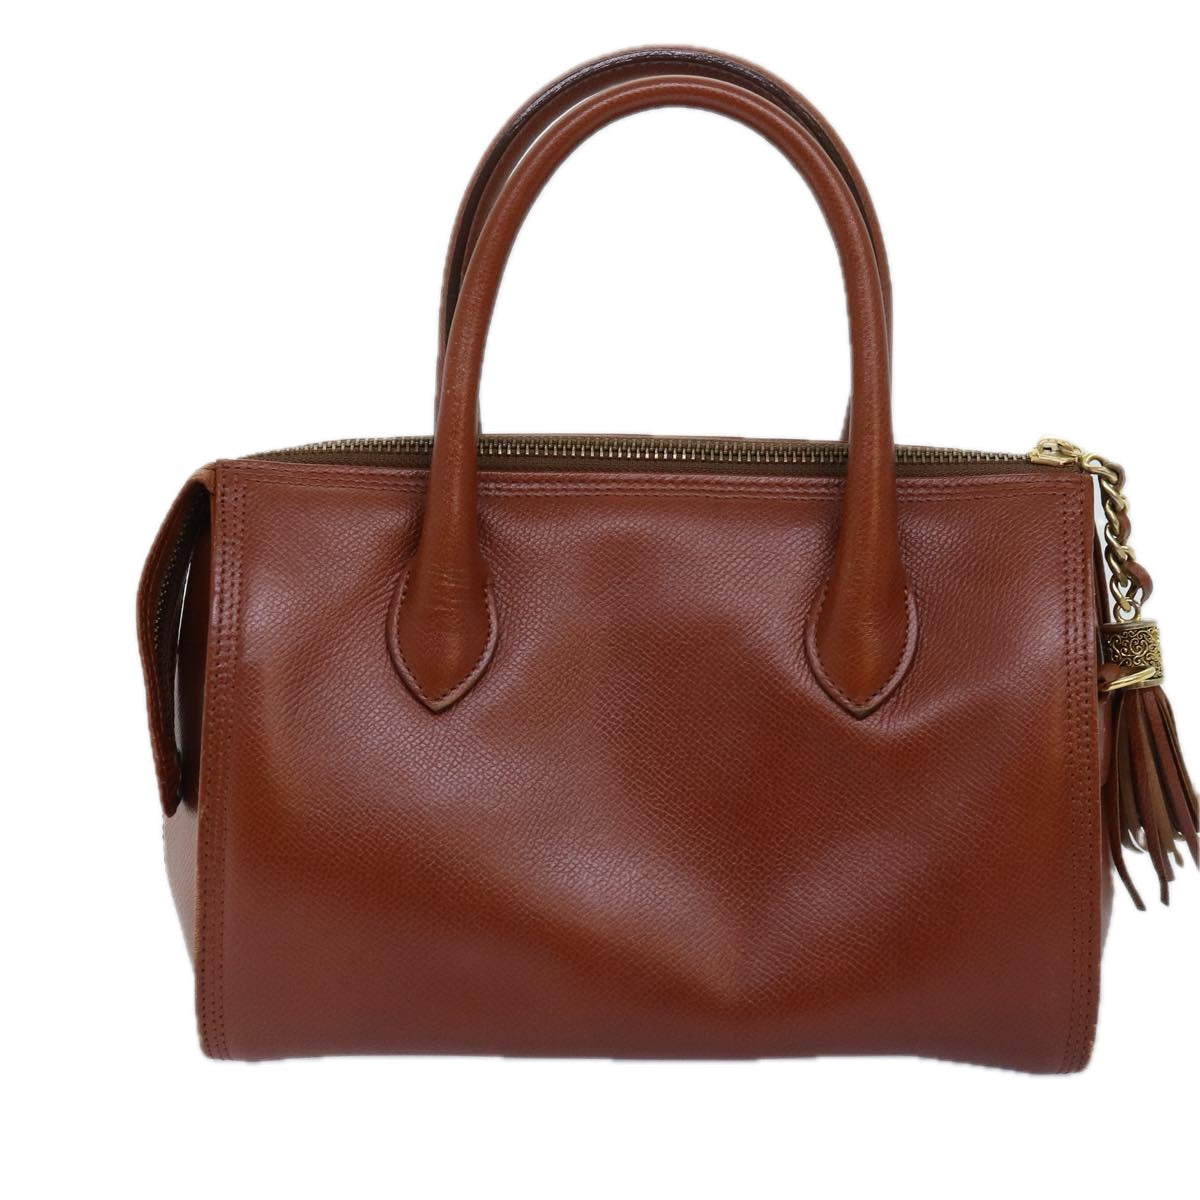 VALENTINO Hand Bag Leather 2way Brown Auth ar11827 - 0